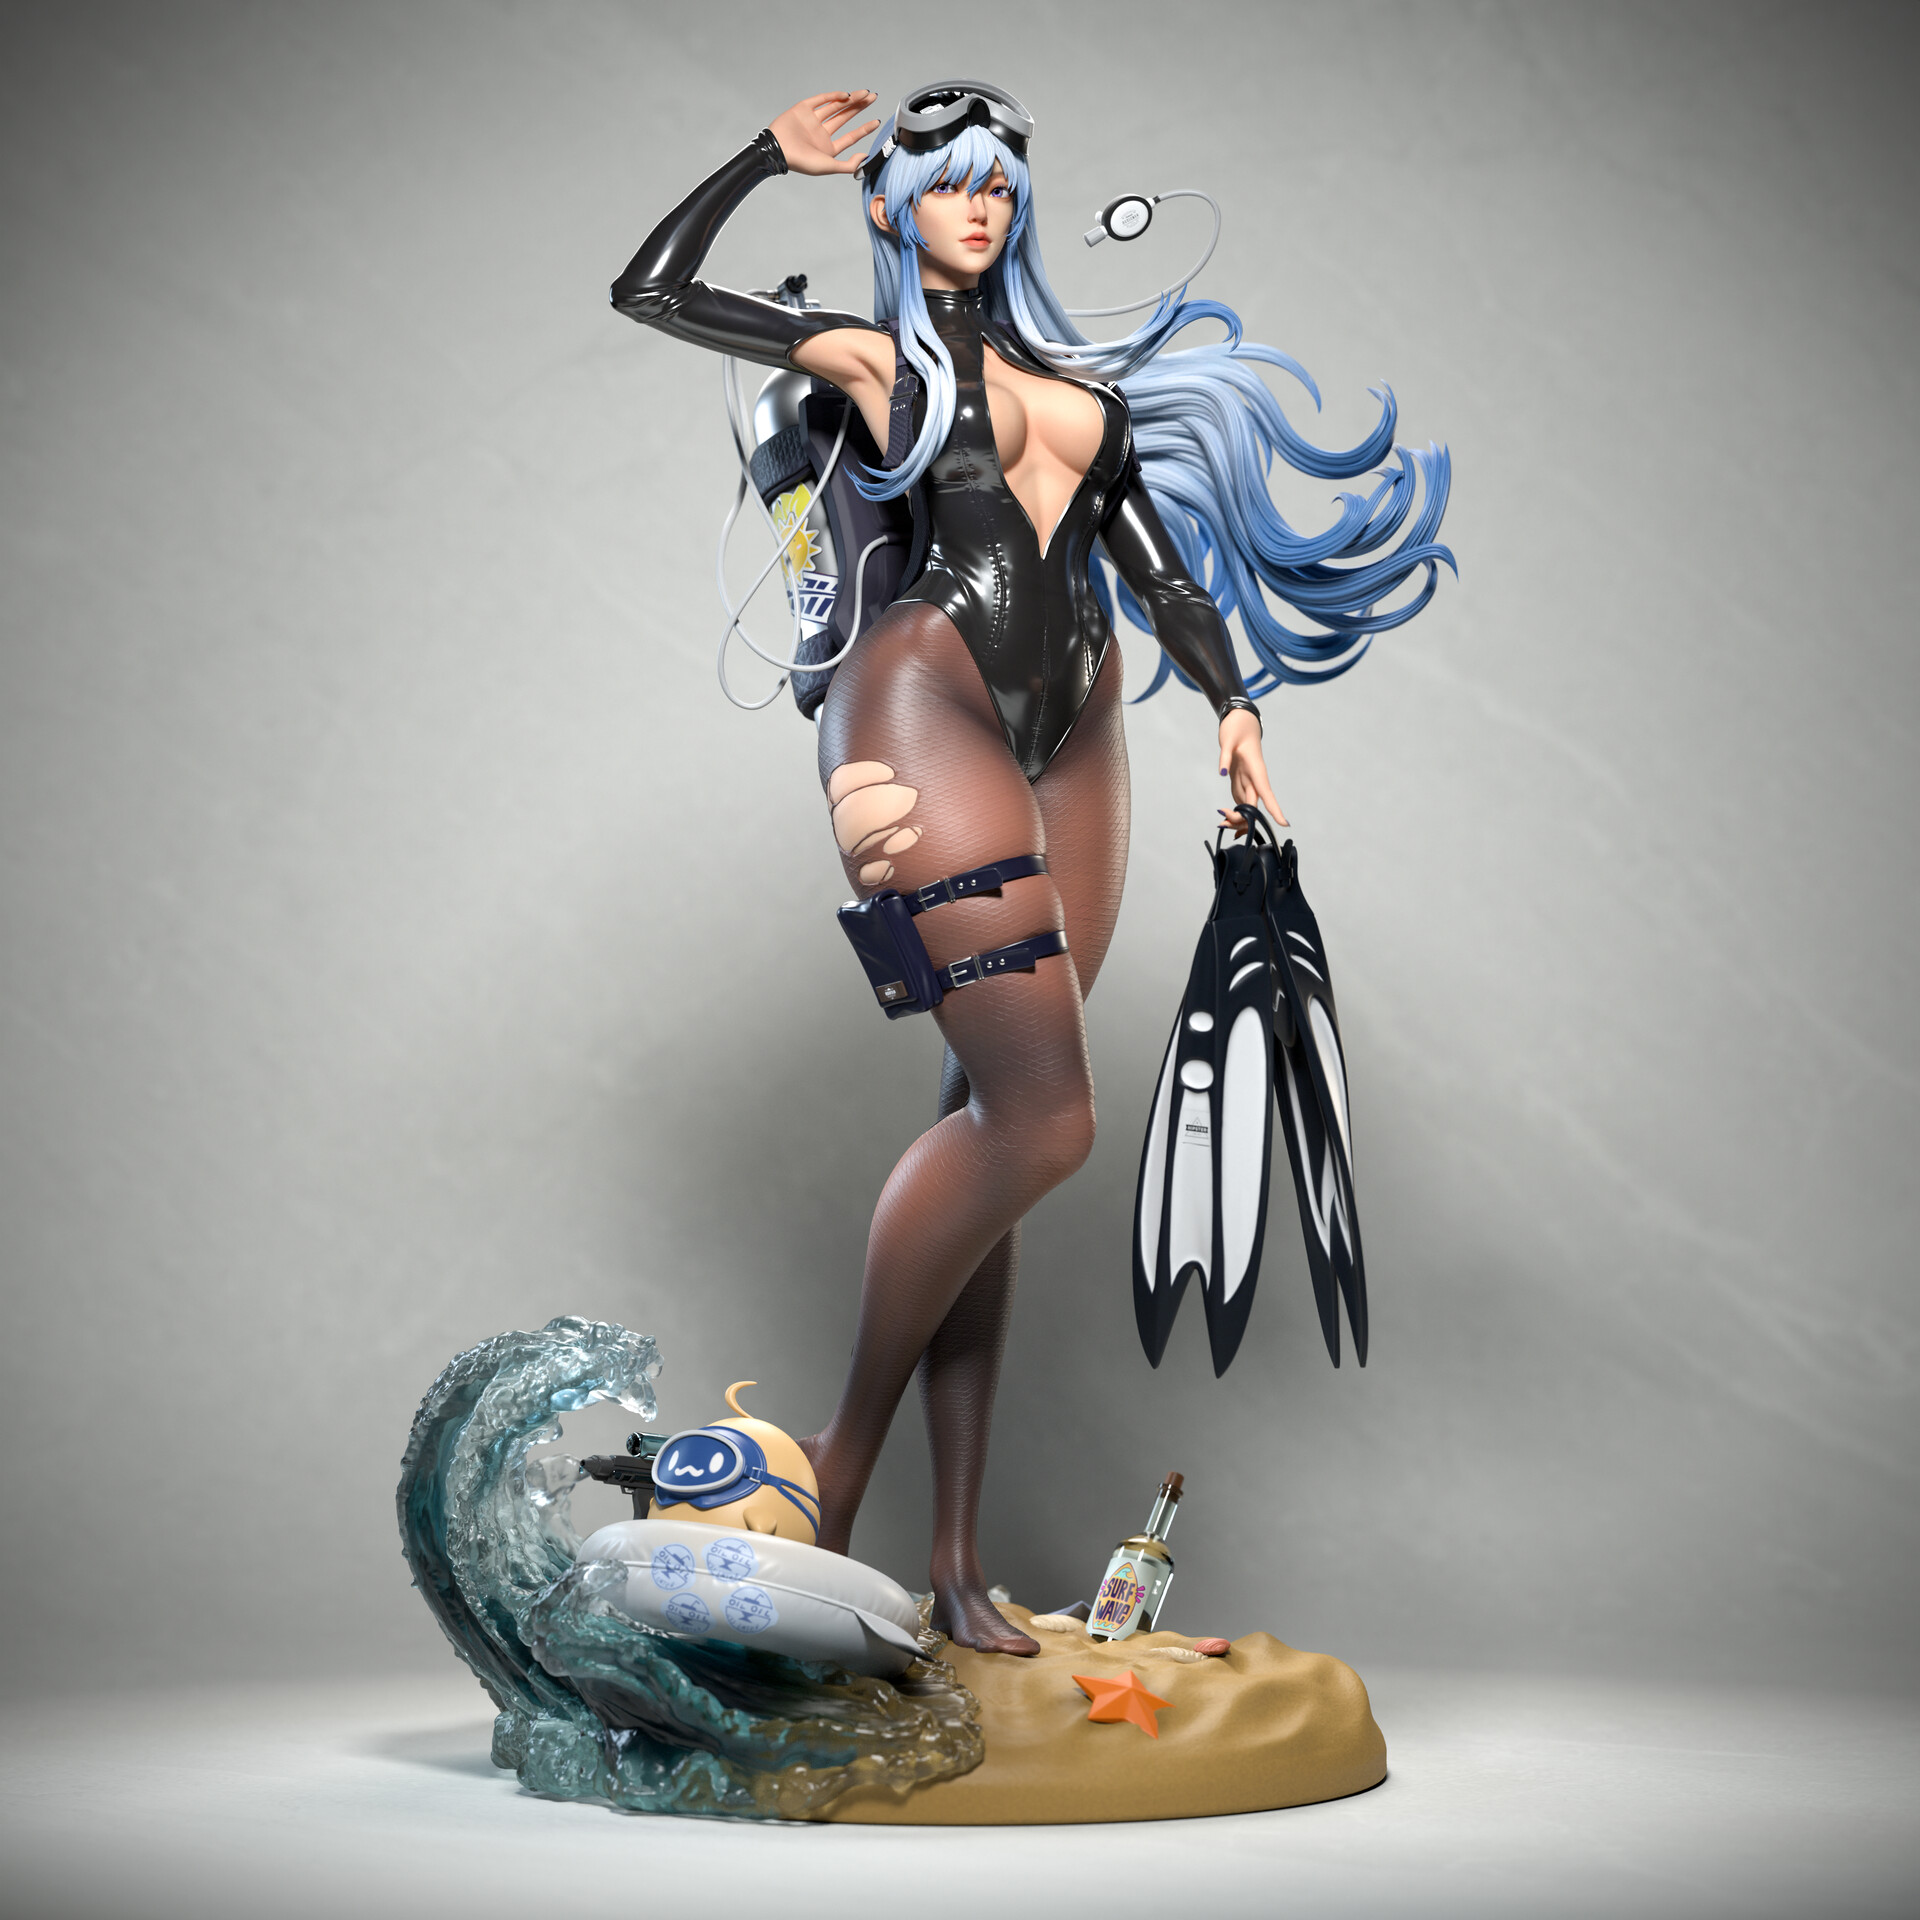 General 1920x1920 women CGI Cifangyi portrait display simple background sand digital art torn pantyhose pantyhose long hair big boobs parted lips goggles blue hair starfish glass bottle floater standing